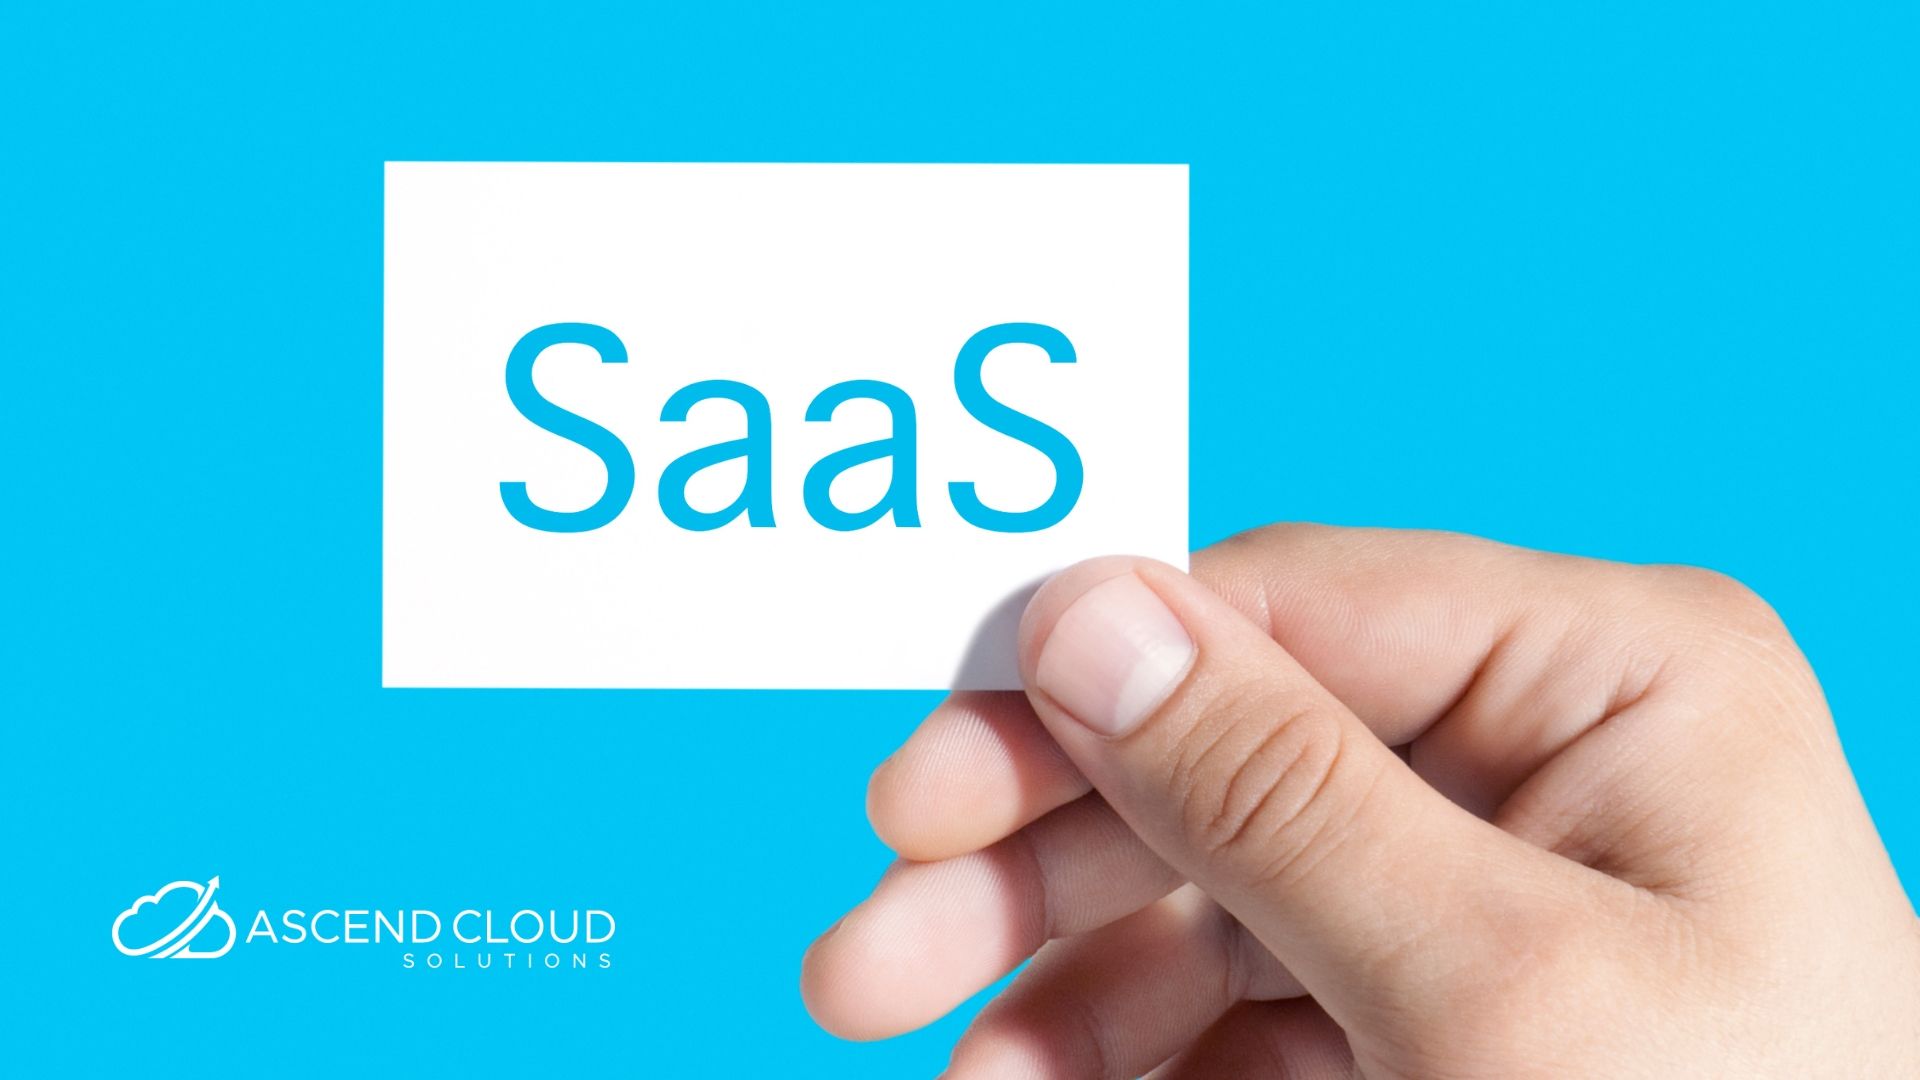 Today, most companies use SaaS, regardless of their size. But can a company thrive on SaaS alone? Join us as we compare SaaS and IaaS solutions.
